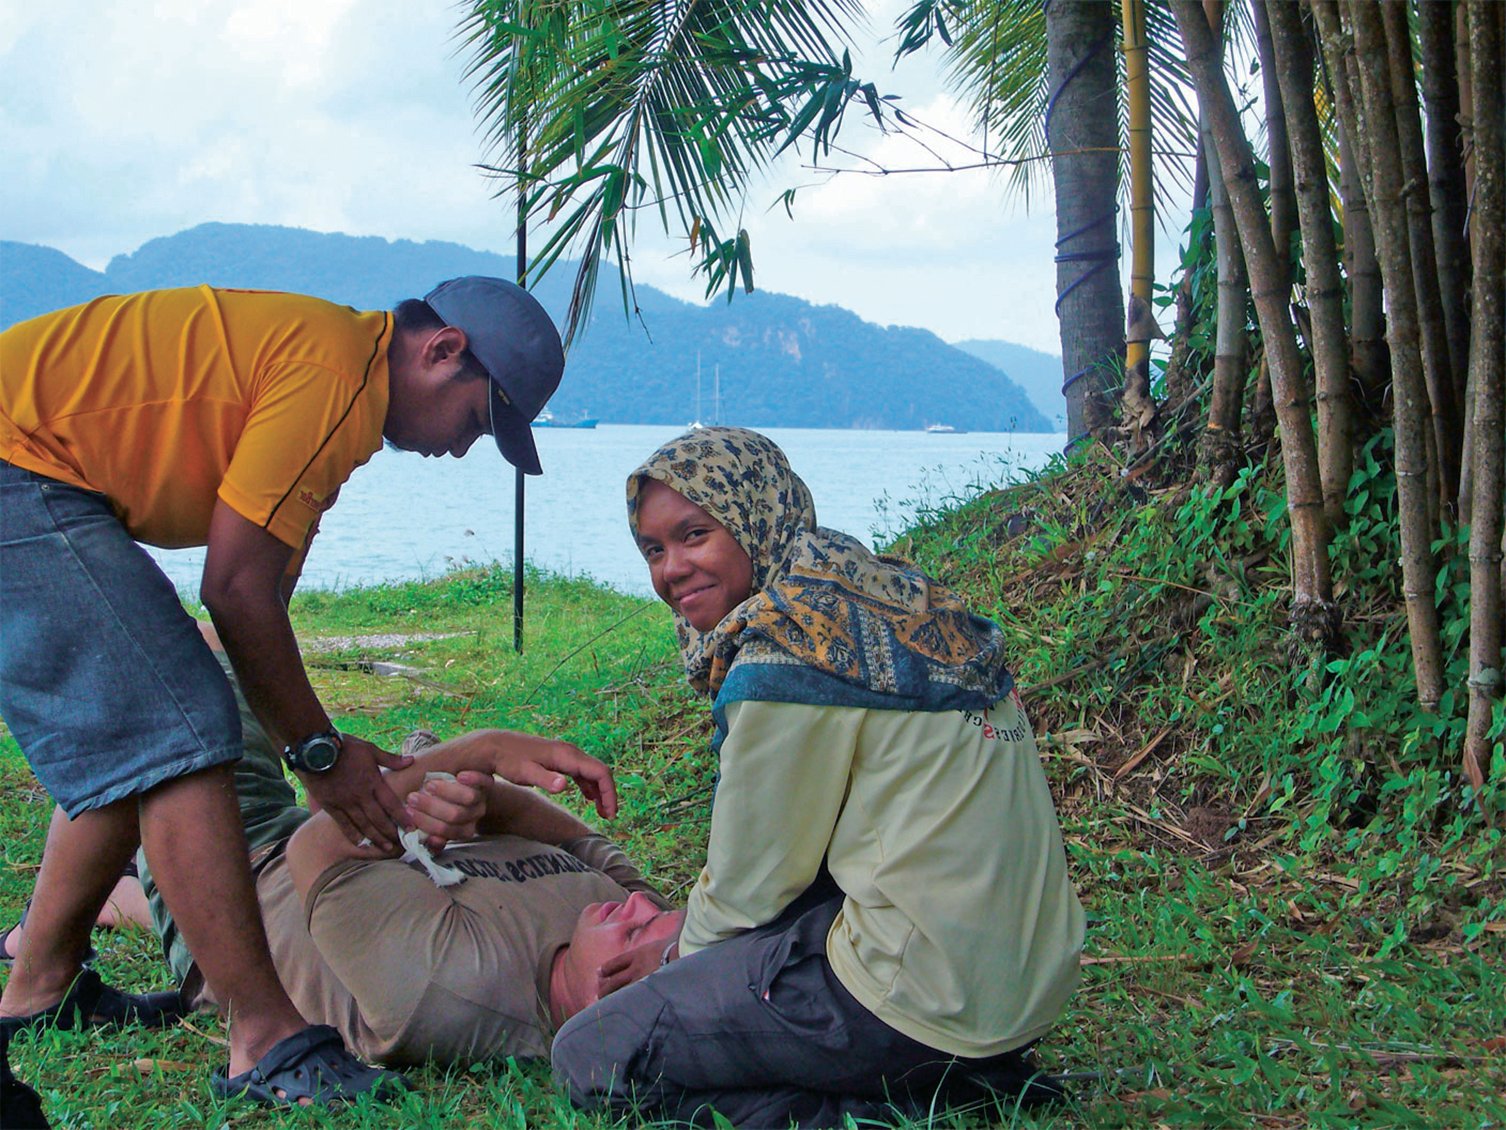 Woman wearing a head scarf and a man practice patient care on a NOLS wilderness medicine course